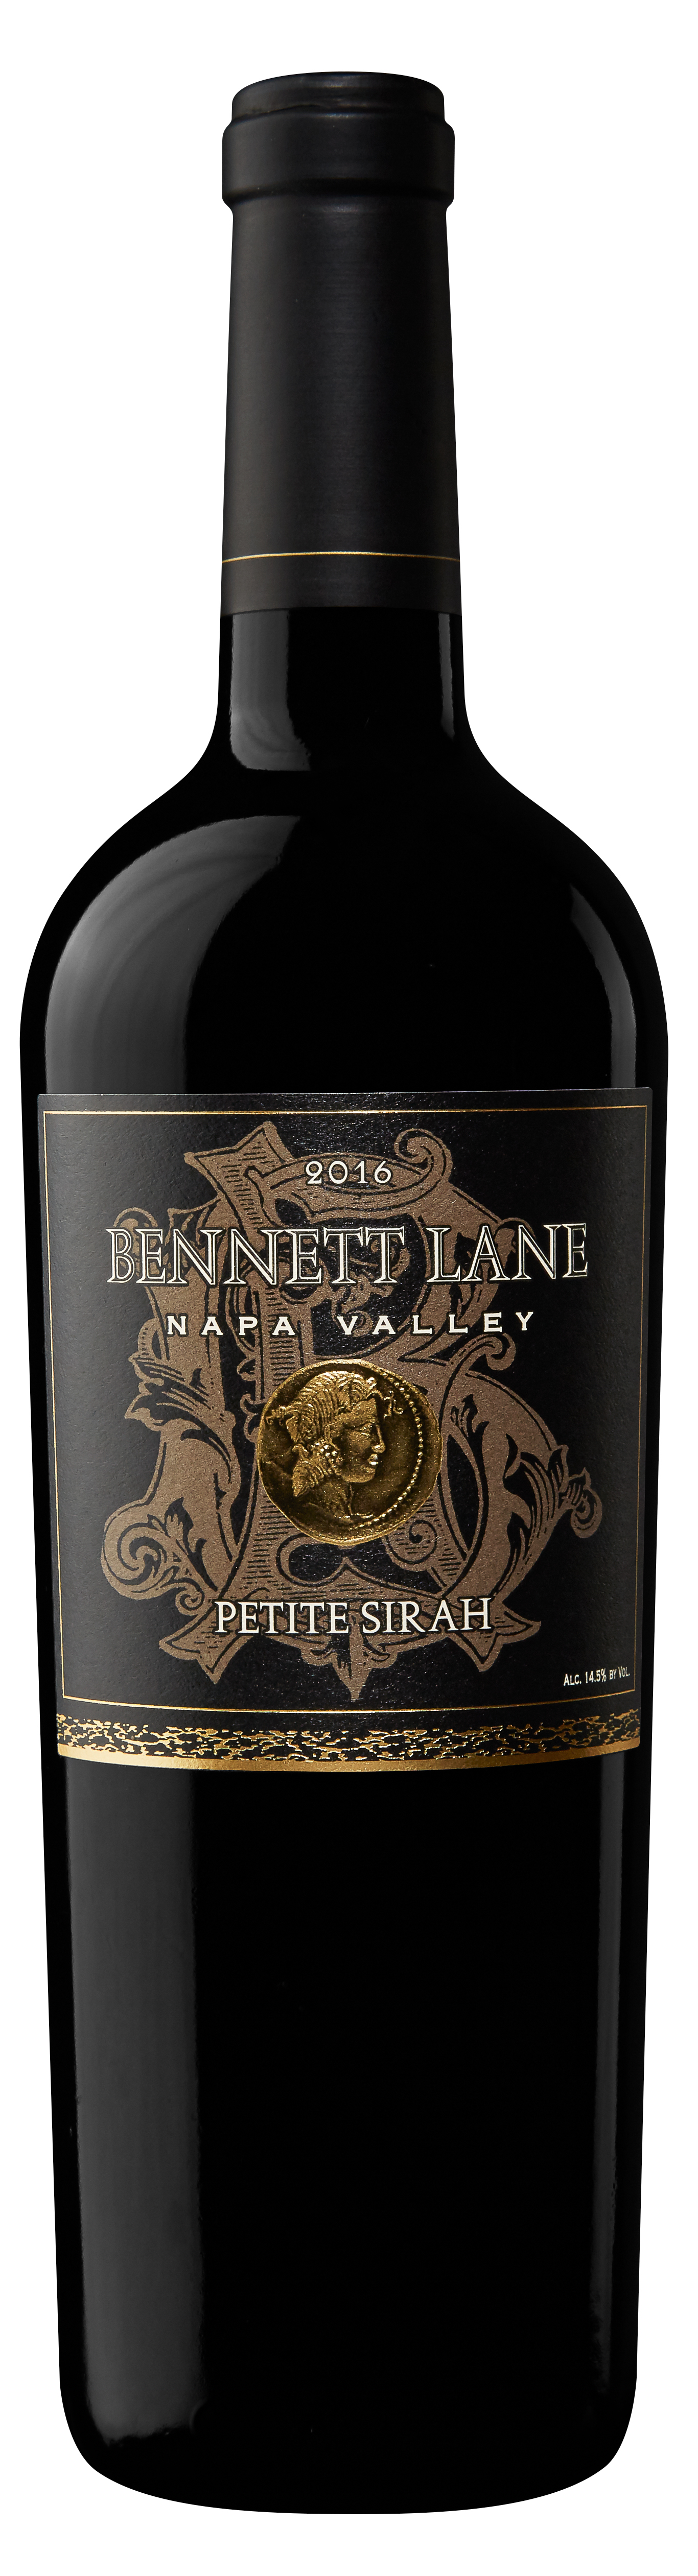 Product Image for 2019 Petite Sirah